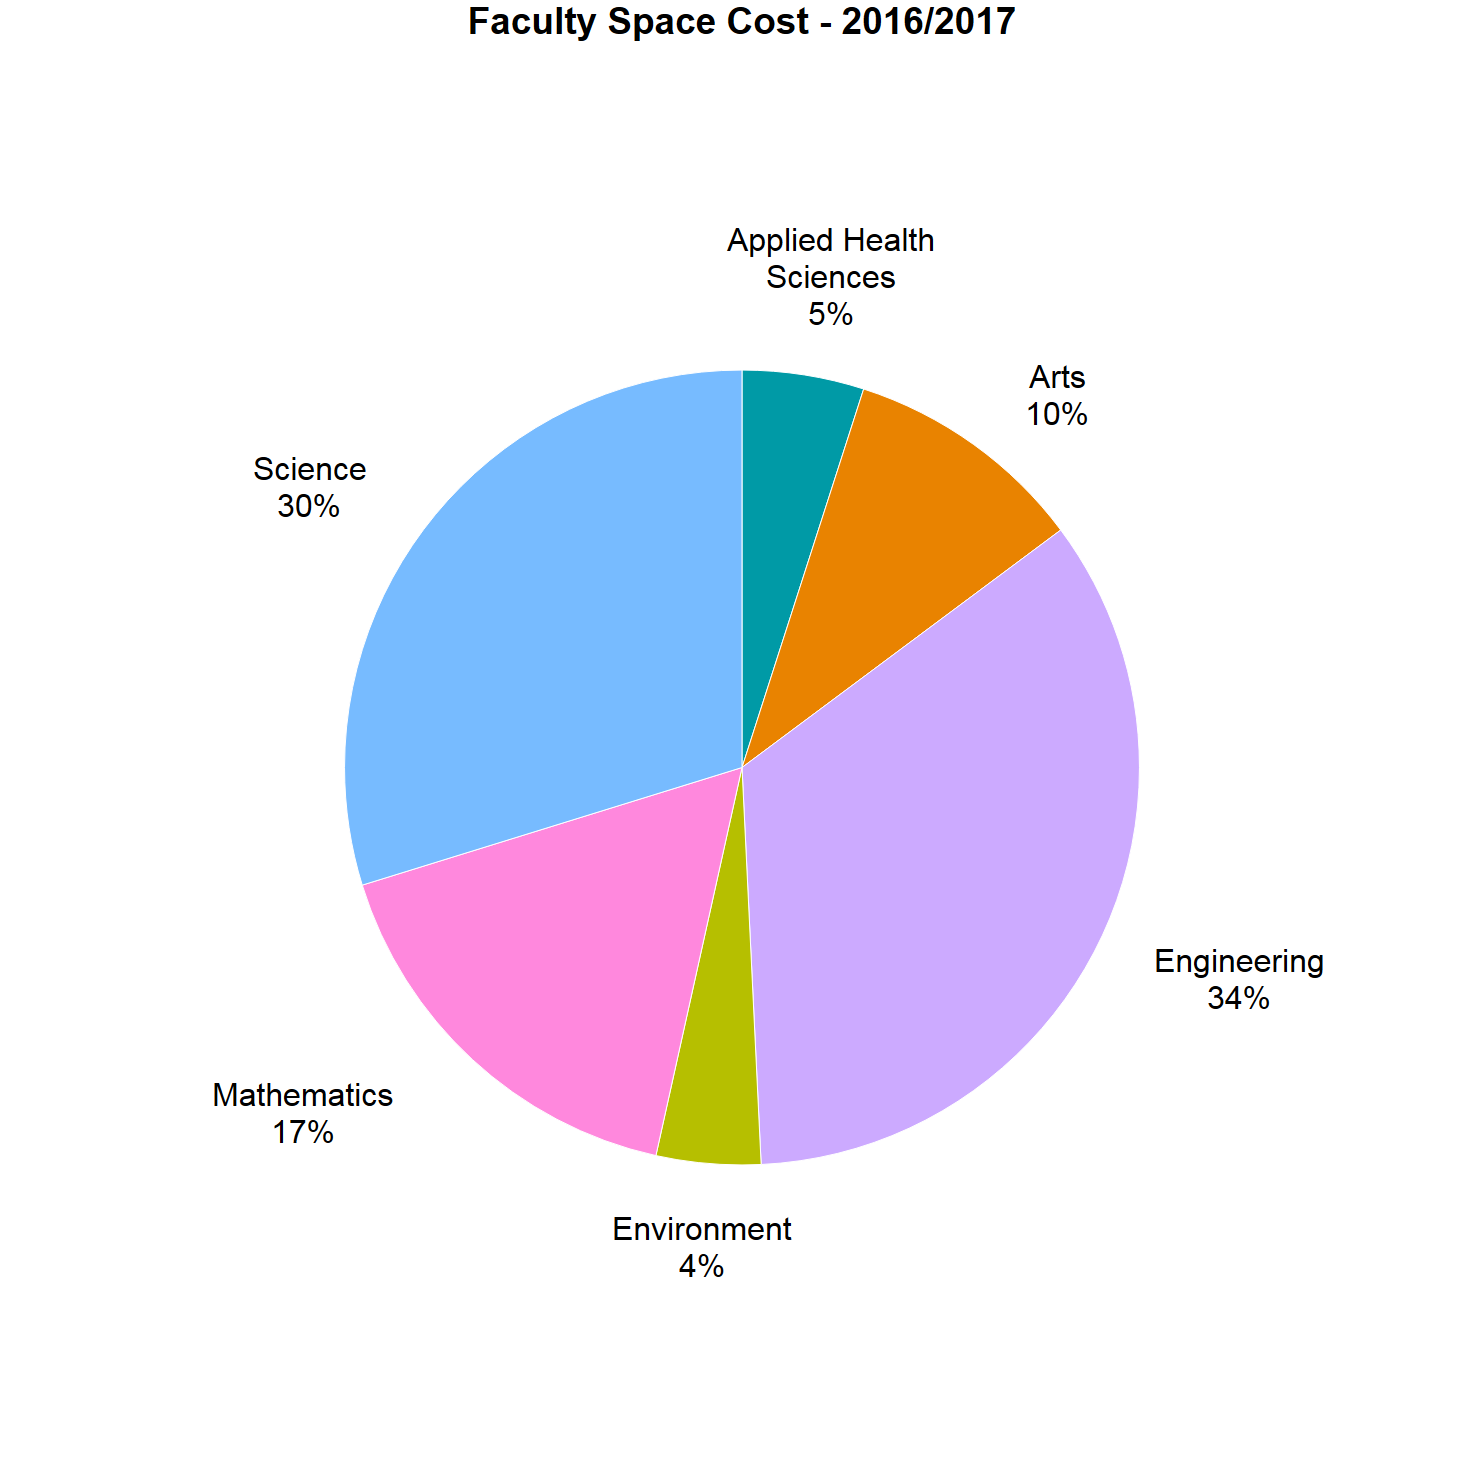 Faculty Space Cost pie chart